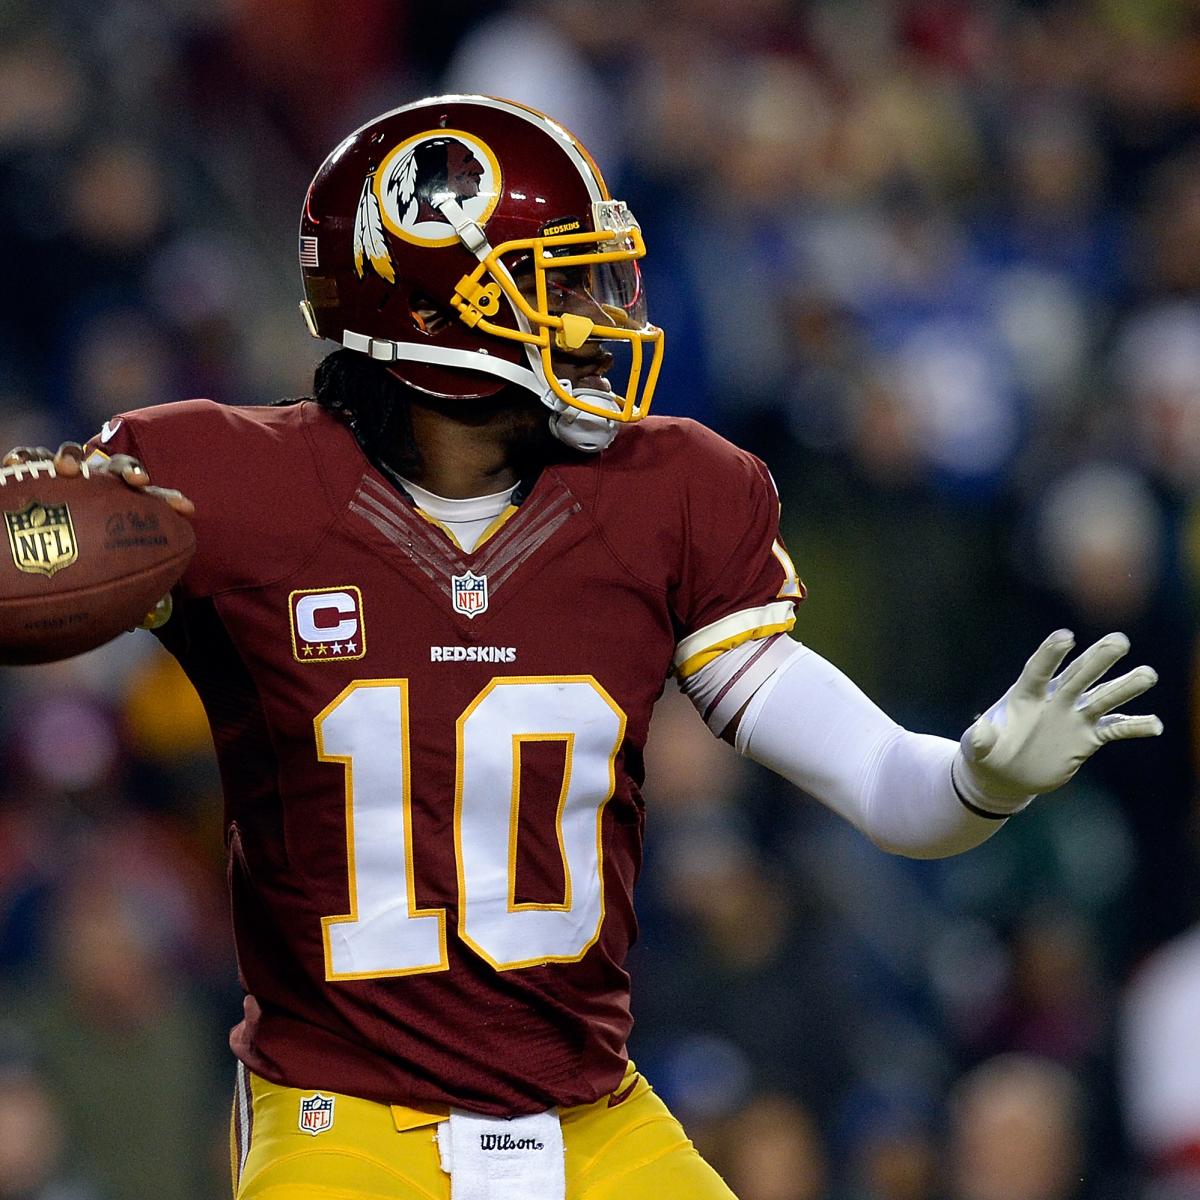 2014 Washington Redskins Schedule: Full Listing of Dates, Times and TV